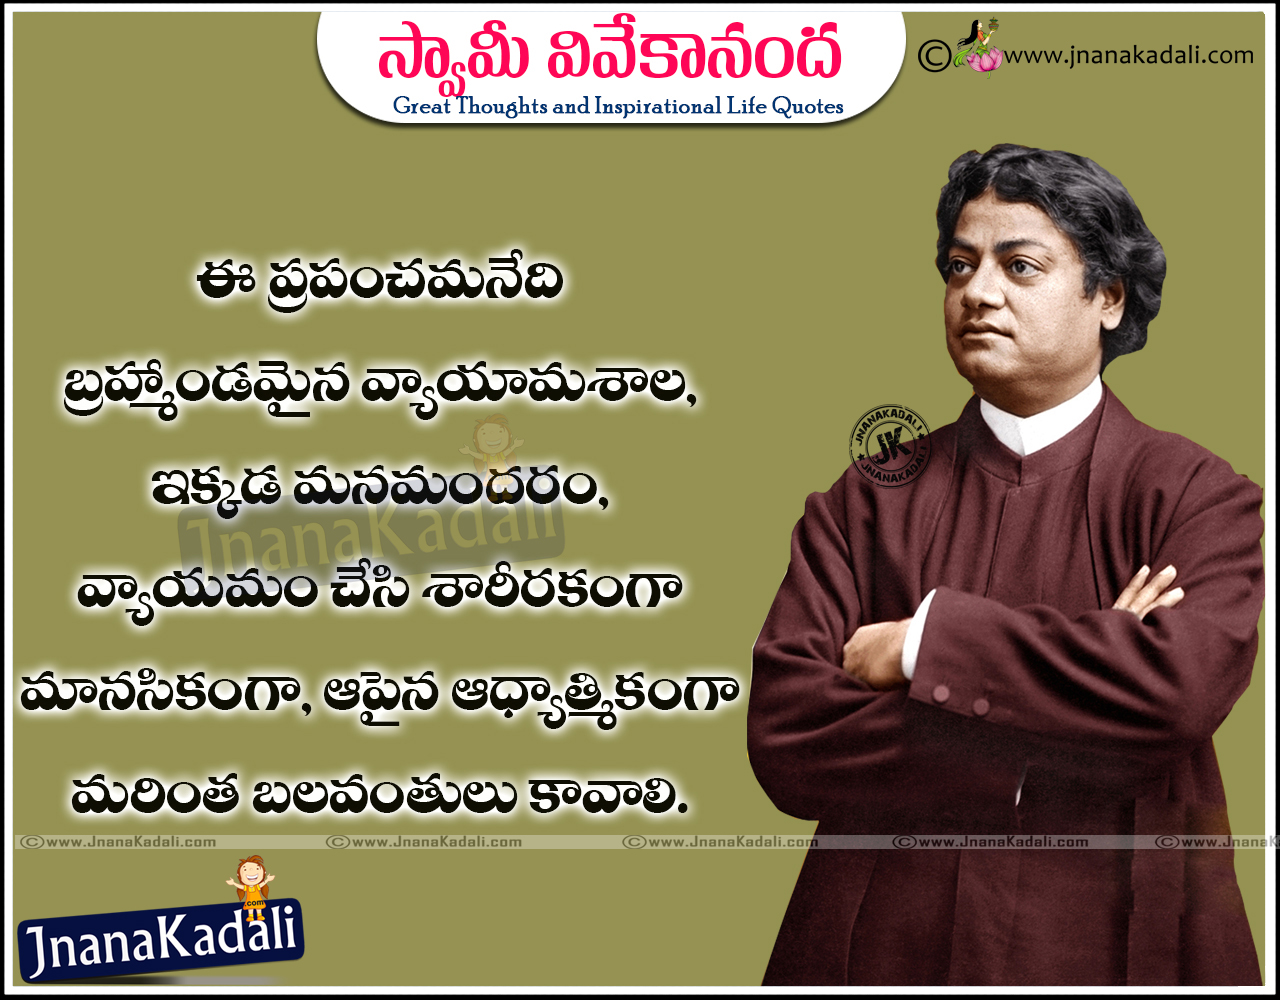 Telugu Concentration Quotes by swami vivekananda Famous new swami vivekananda Wallpapers and quotes images